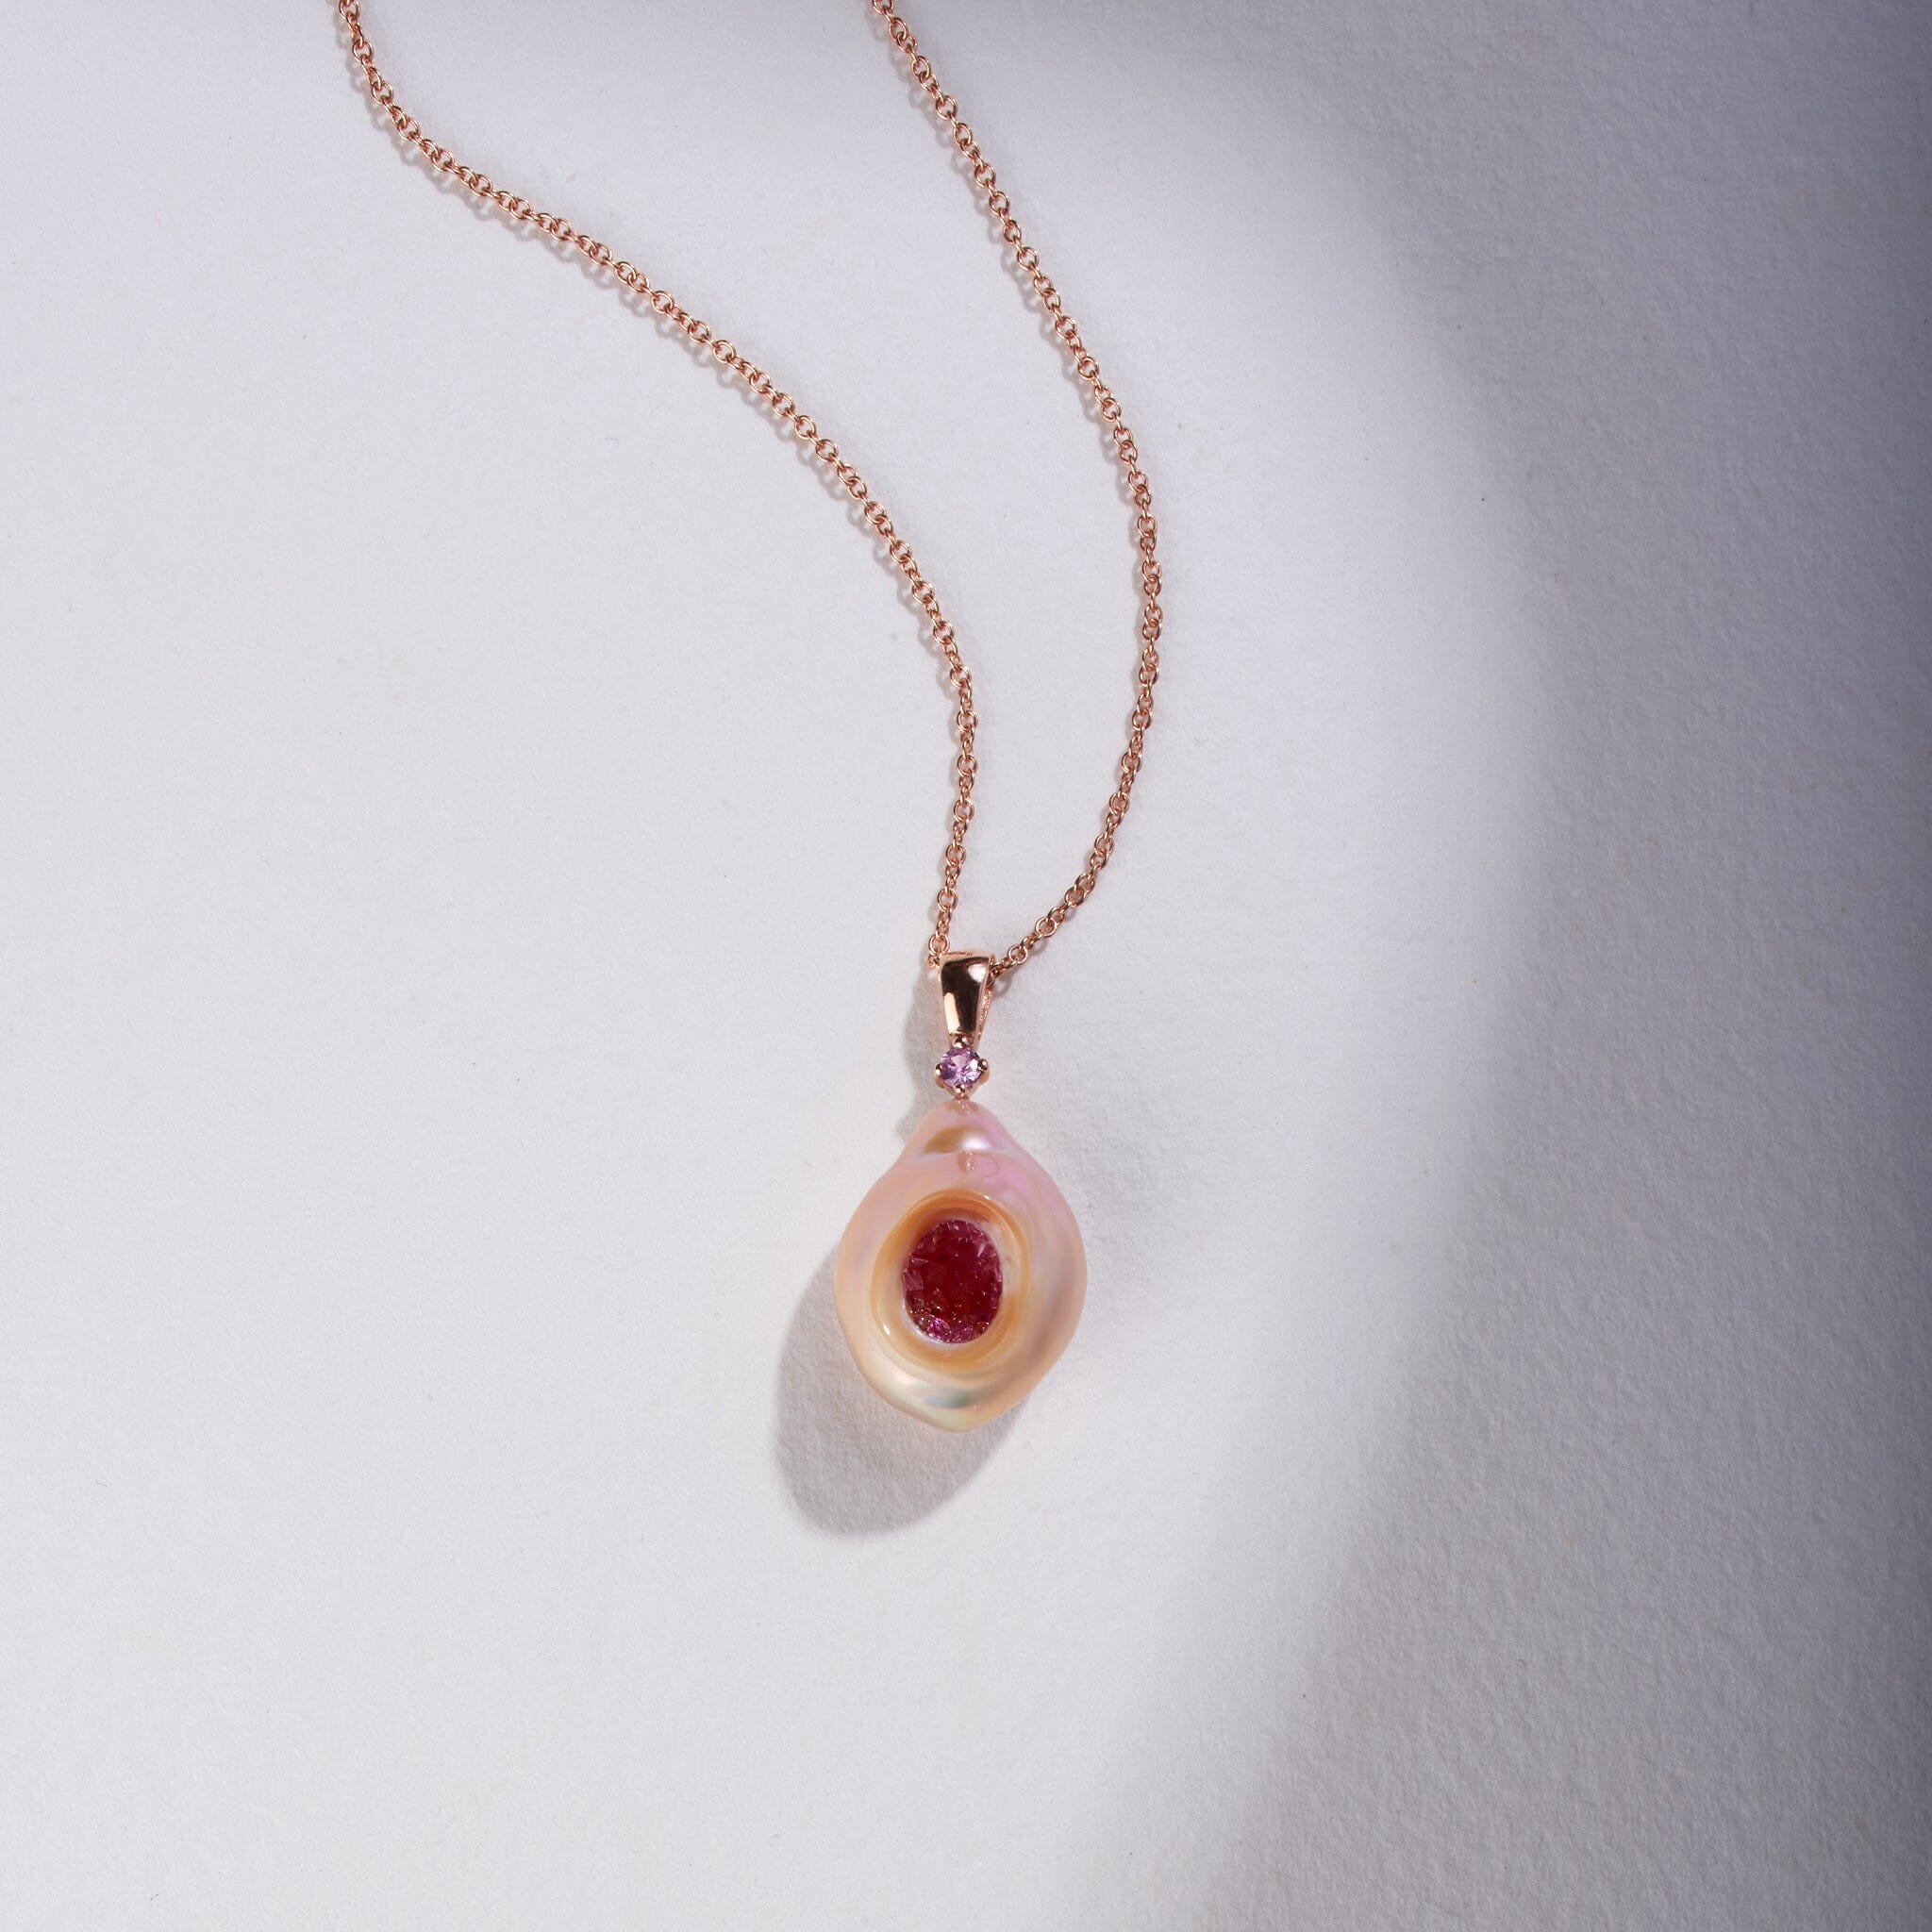 Freshwater Souffle Pearl Finestrino Pendant with Pink Sapphire